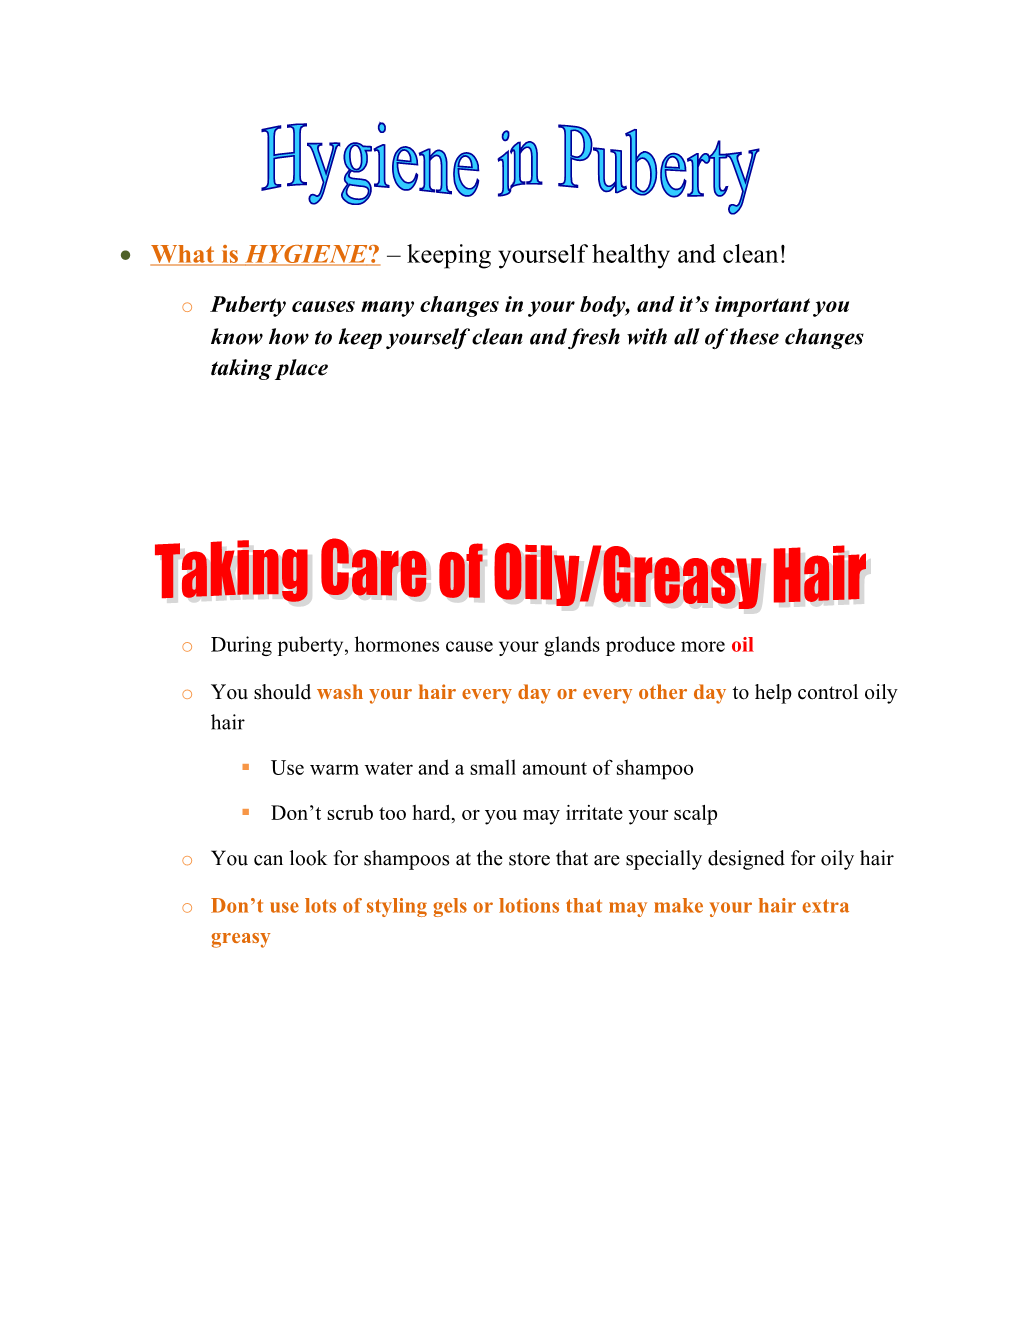 What Is HYGIENE? Keeping Yourself Healthy and Clean!